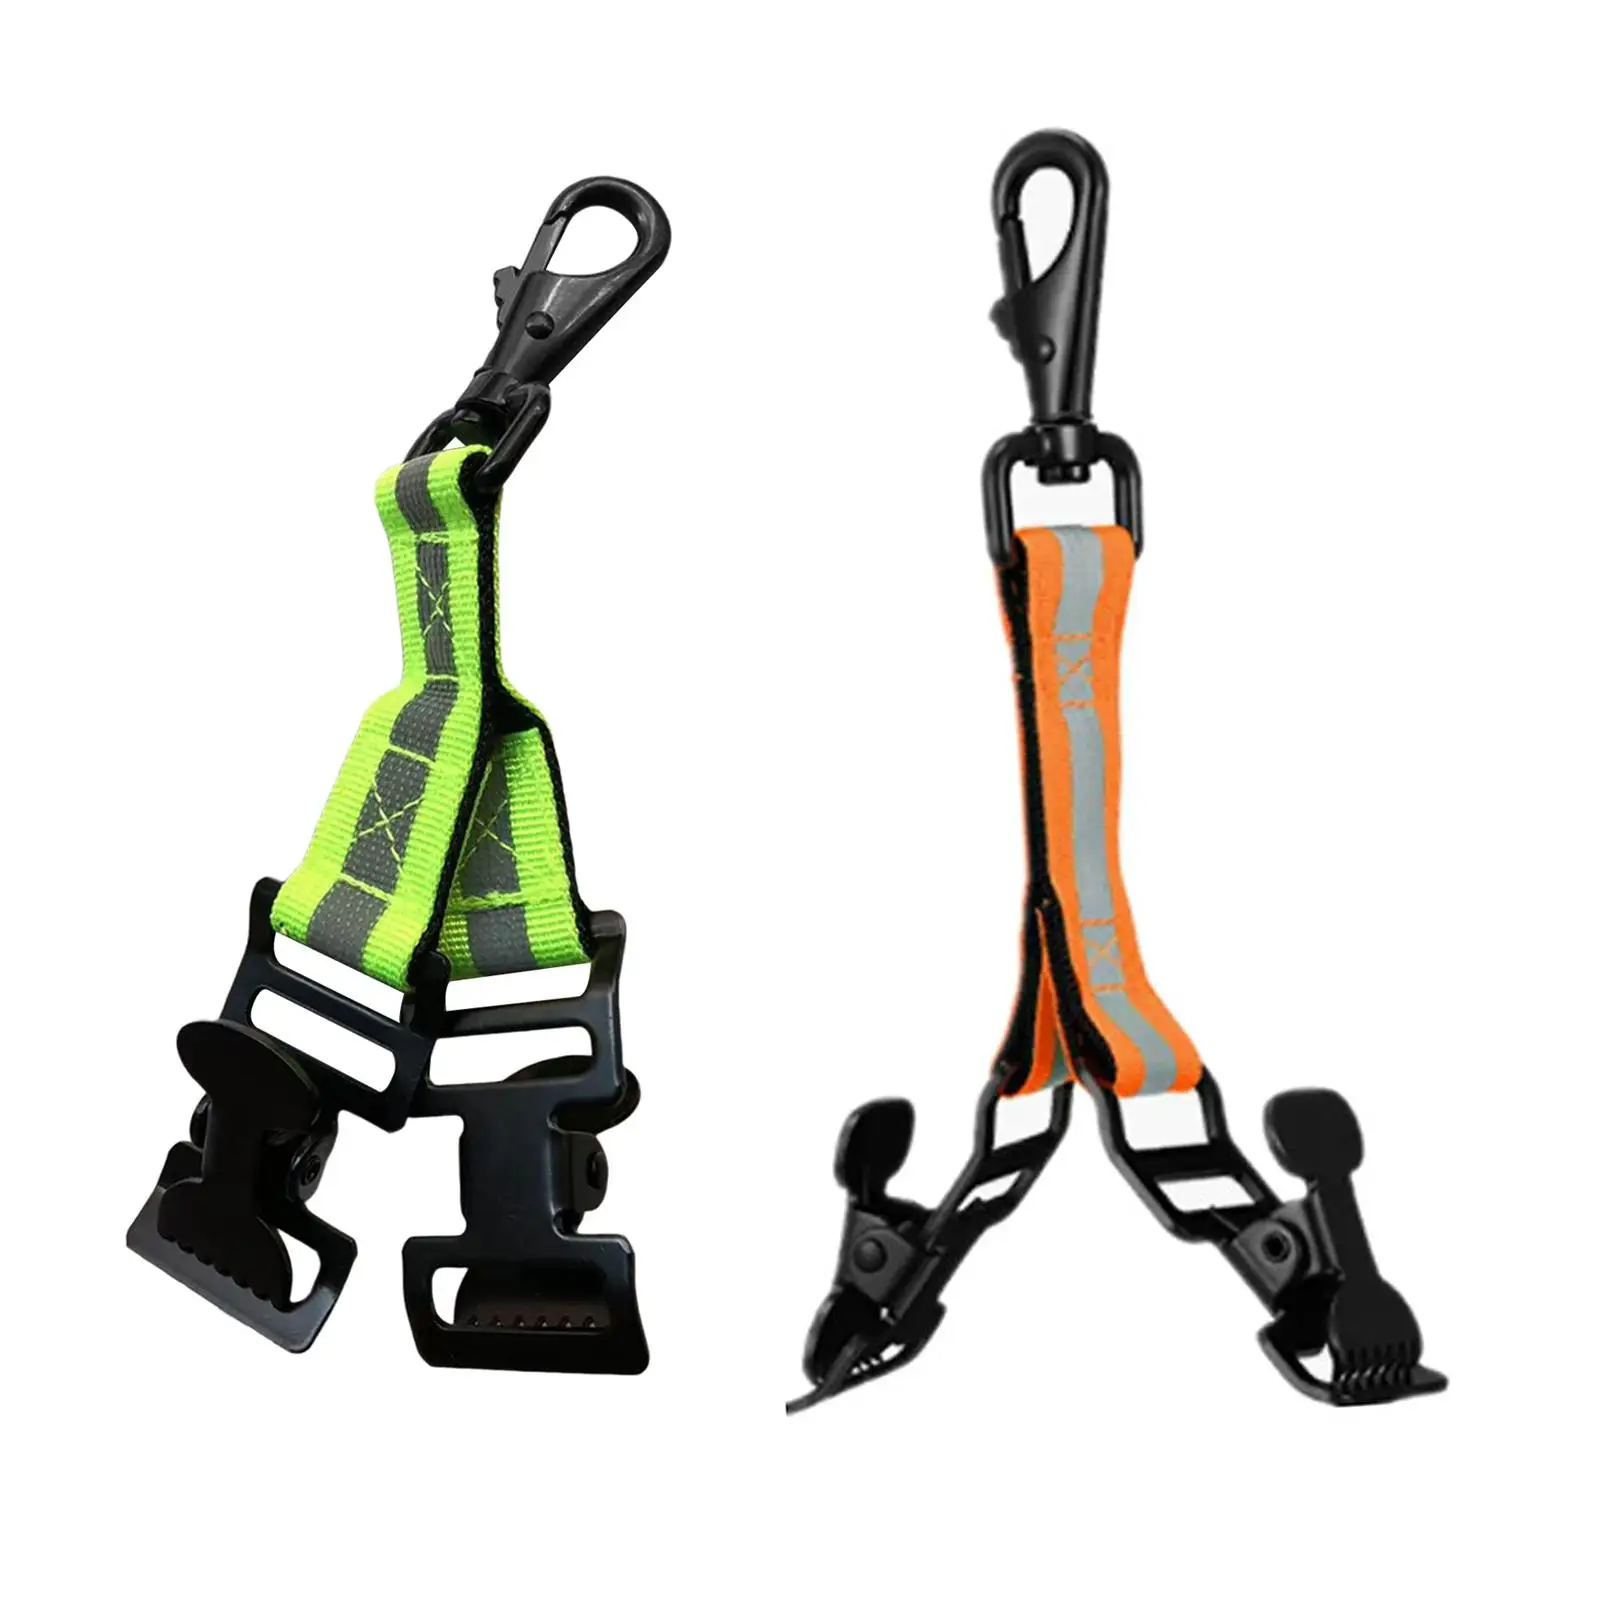 Glove Clips Firefighter Glove Strap Gloves Holder with 2 Clip for Hanging Gloves Tool Bags Glove Keeper Glove Clamp